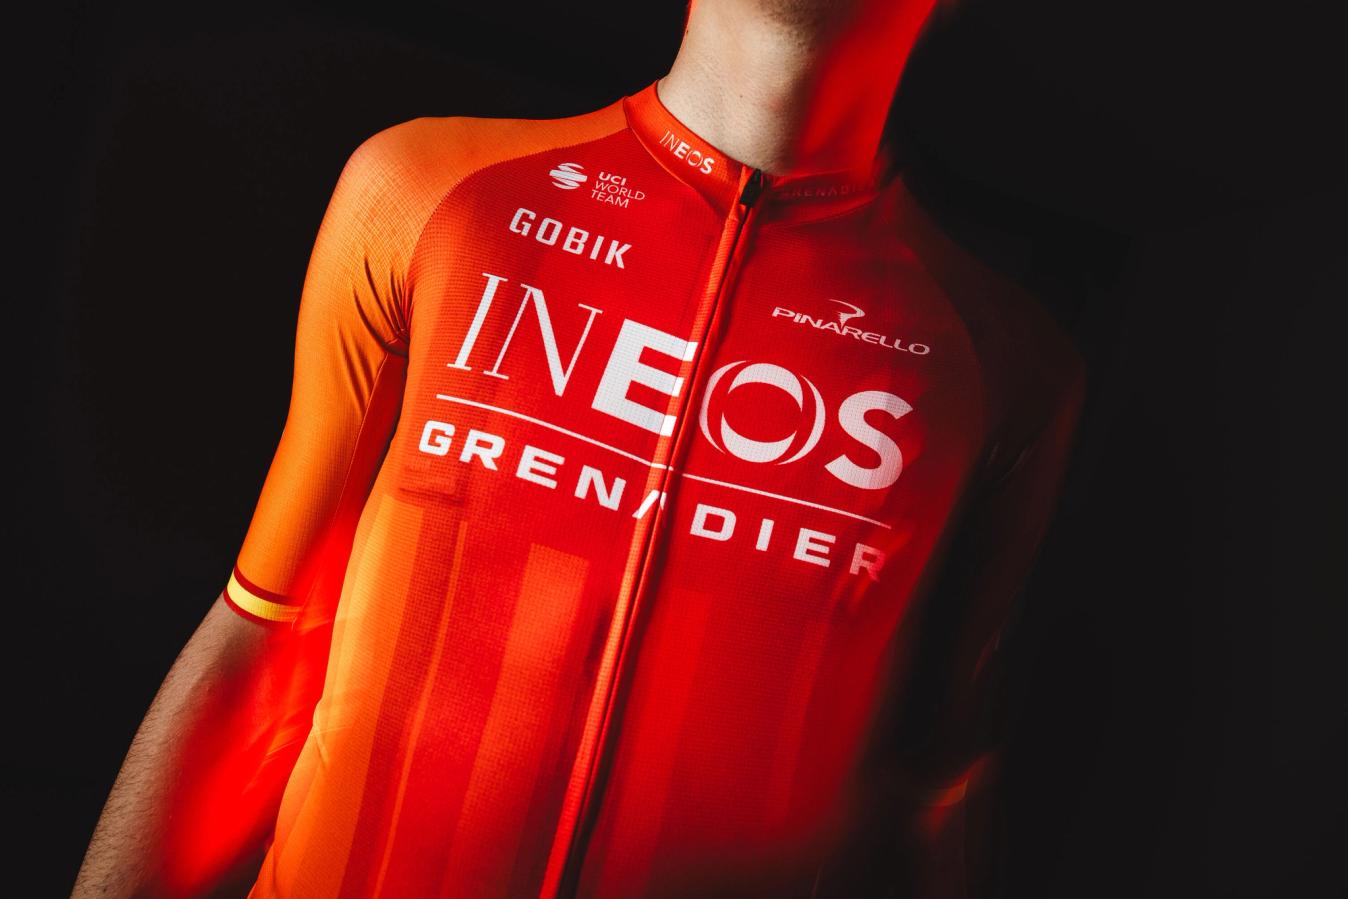 A closer look at the new GOBIK jersey